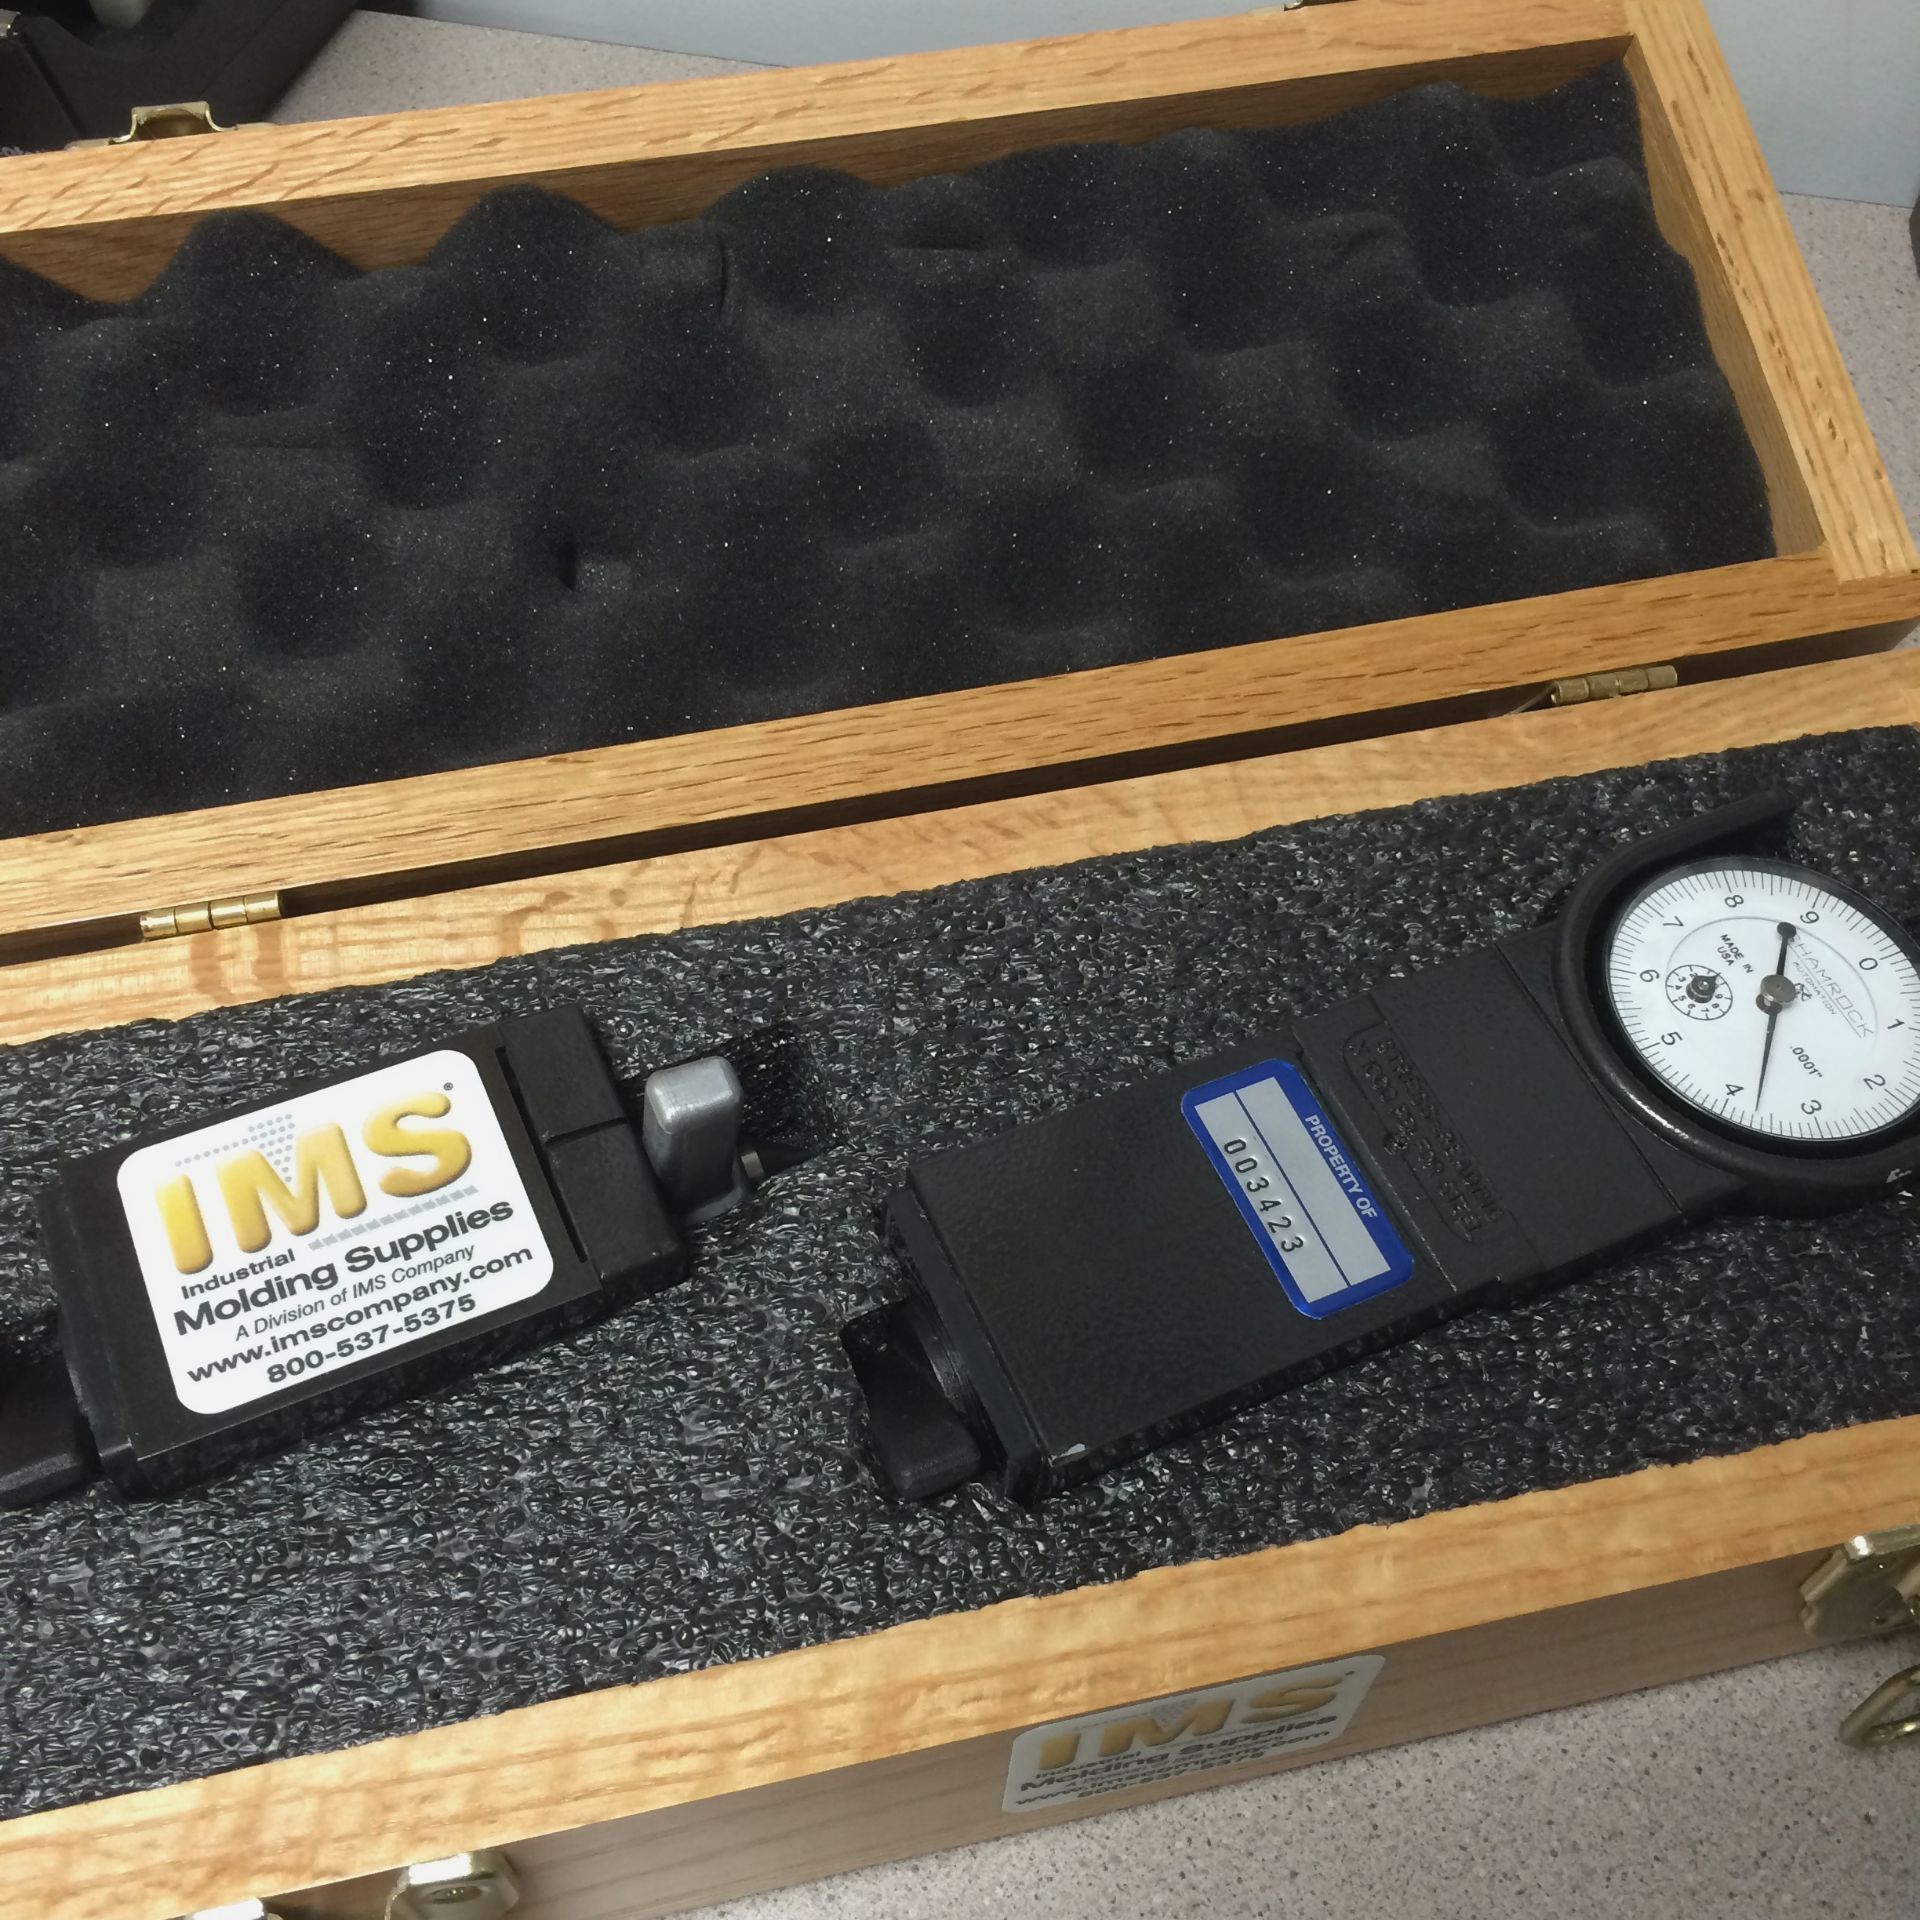 IMS Tie Bar Strain Guage Tester w/ Case for 125+ Ton Injection Molding Machines